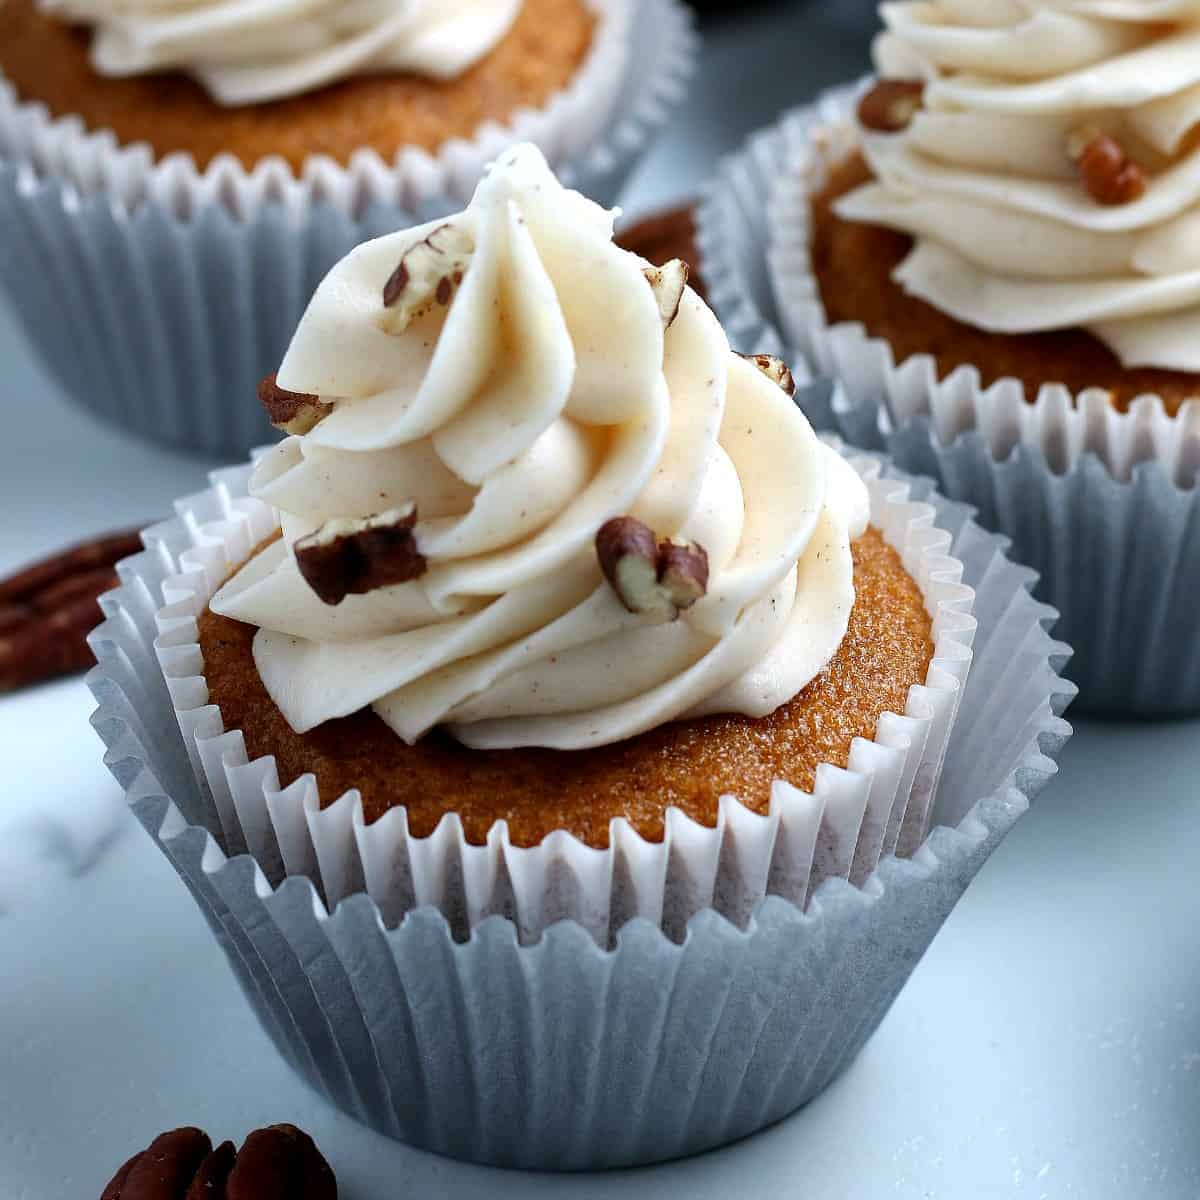 One closeup of a pumpkin cupcake topped with a swirl of cream cheese frosting.